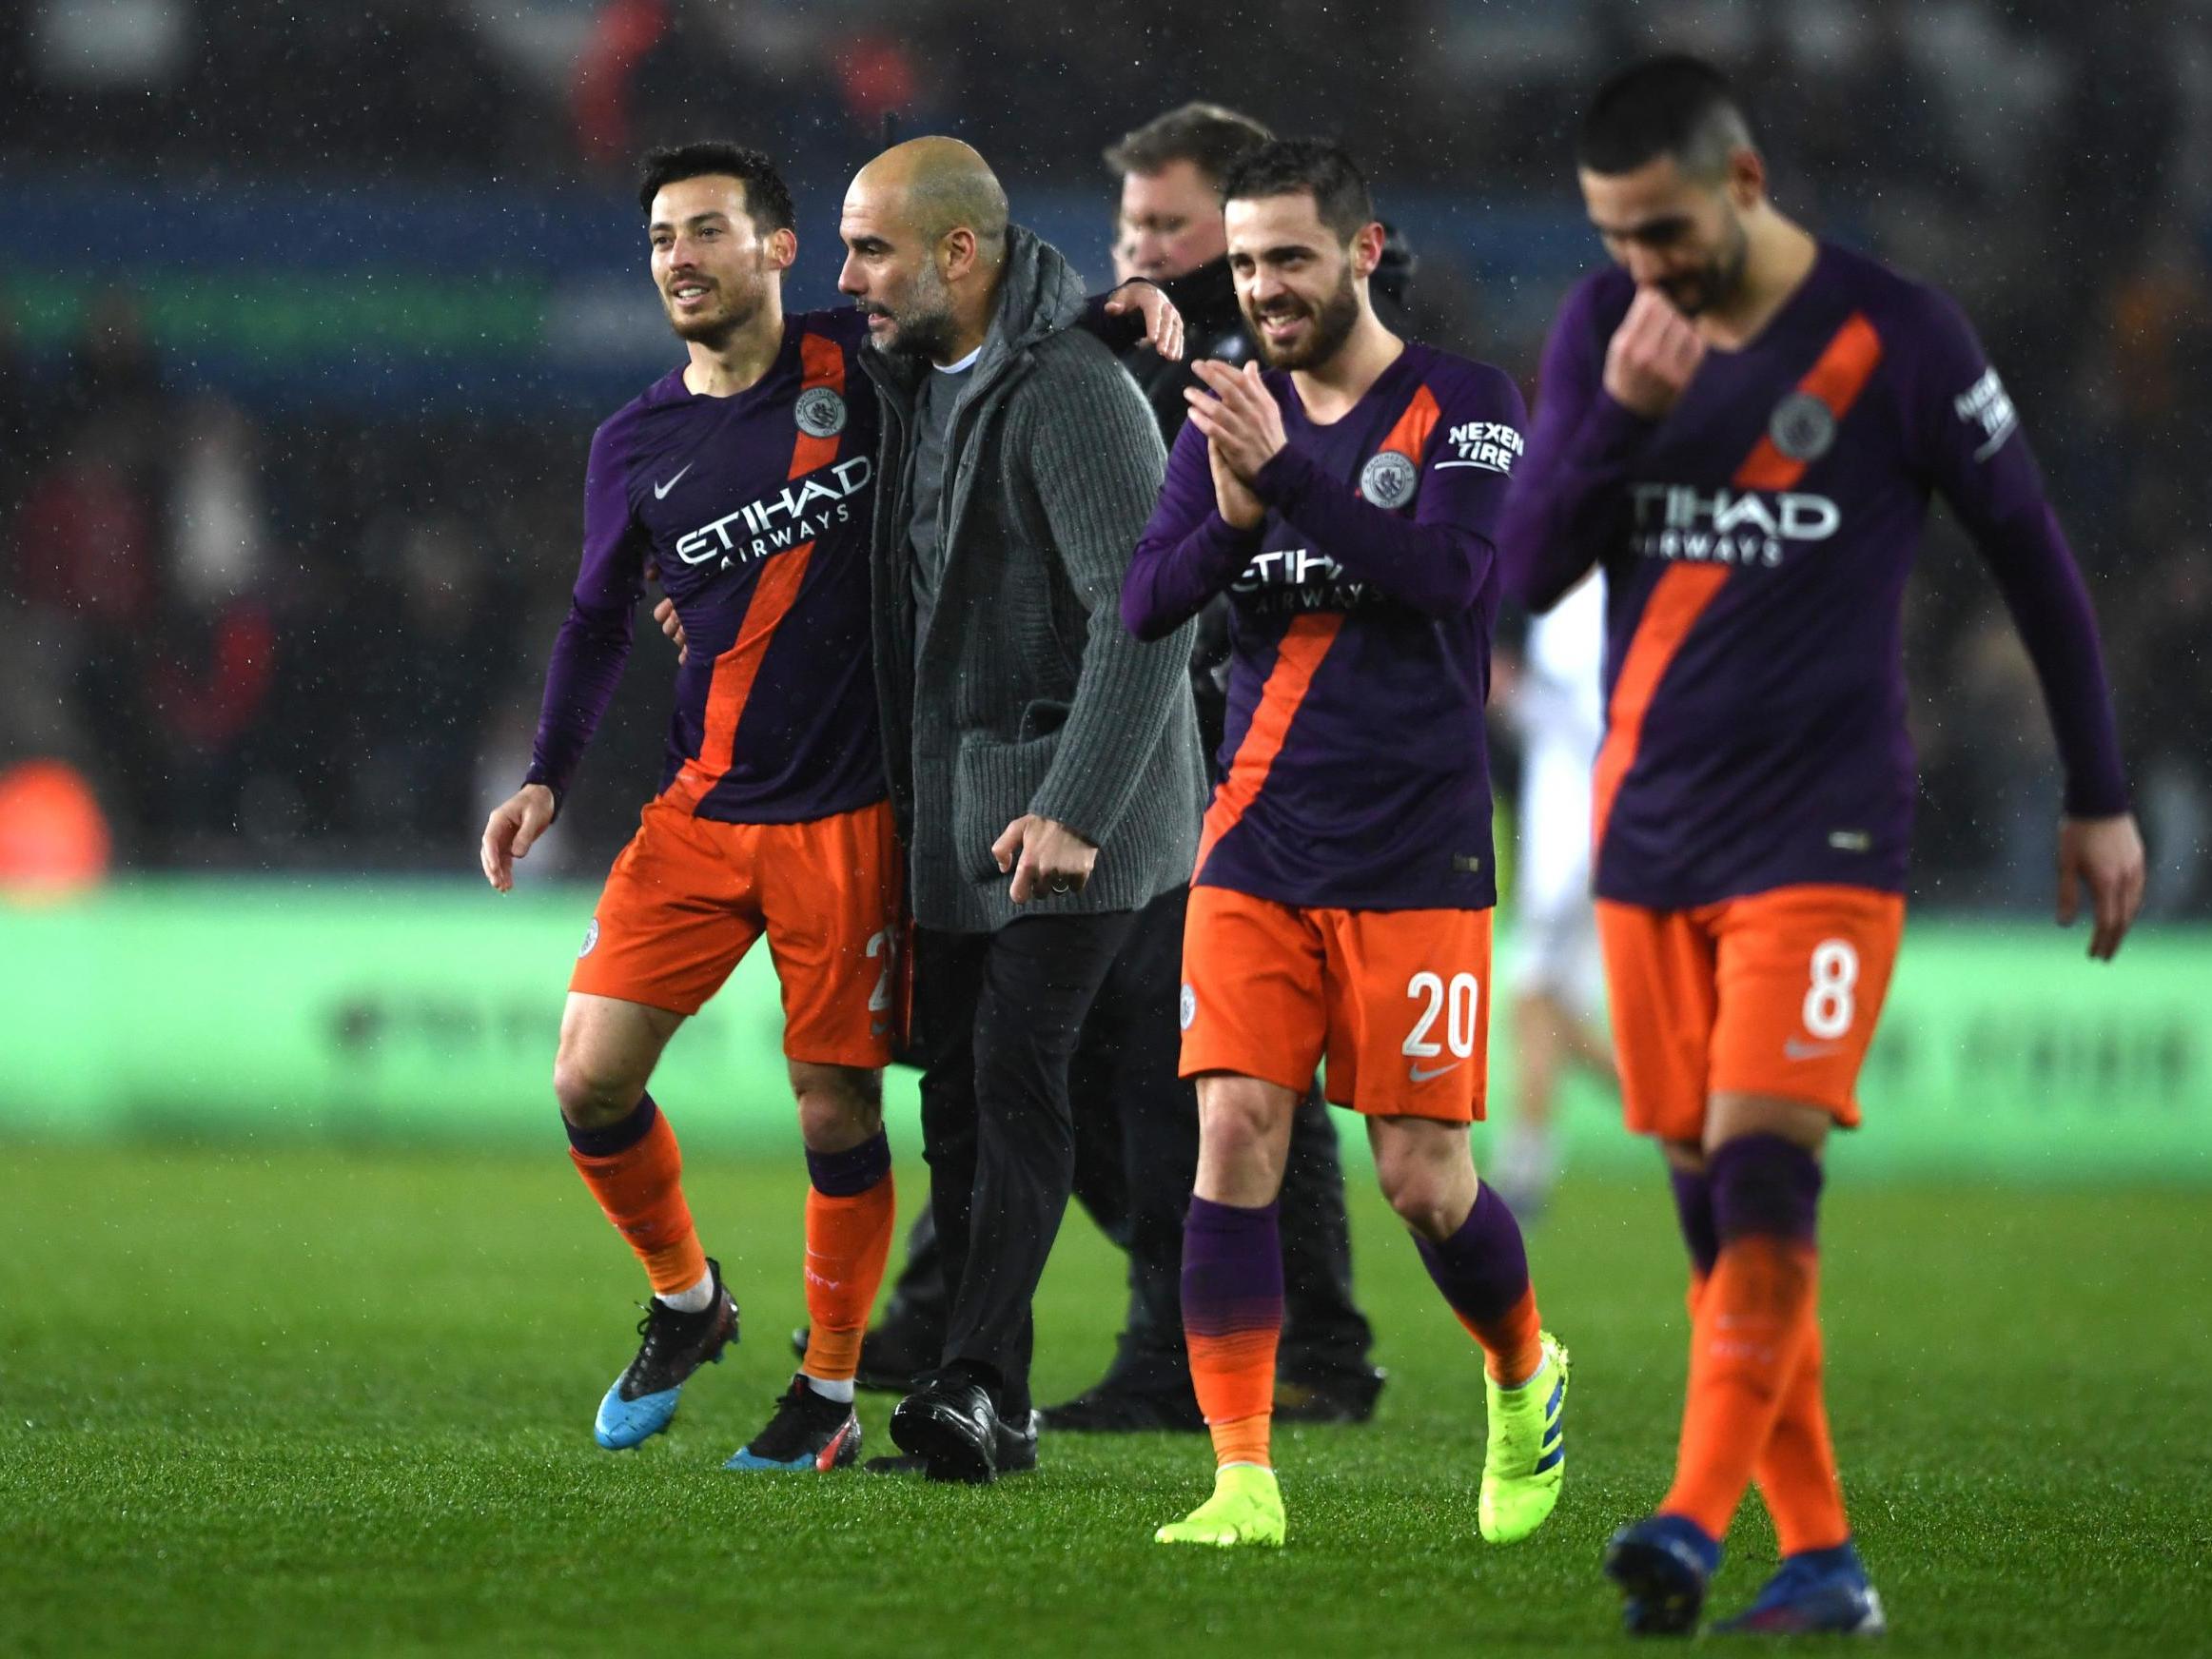 Manchester City beat Swansea 3-2 to reach the semi-finals of the Cup